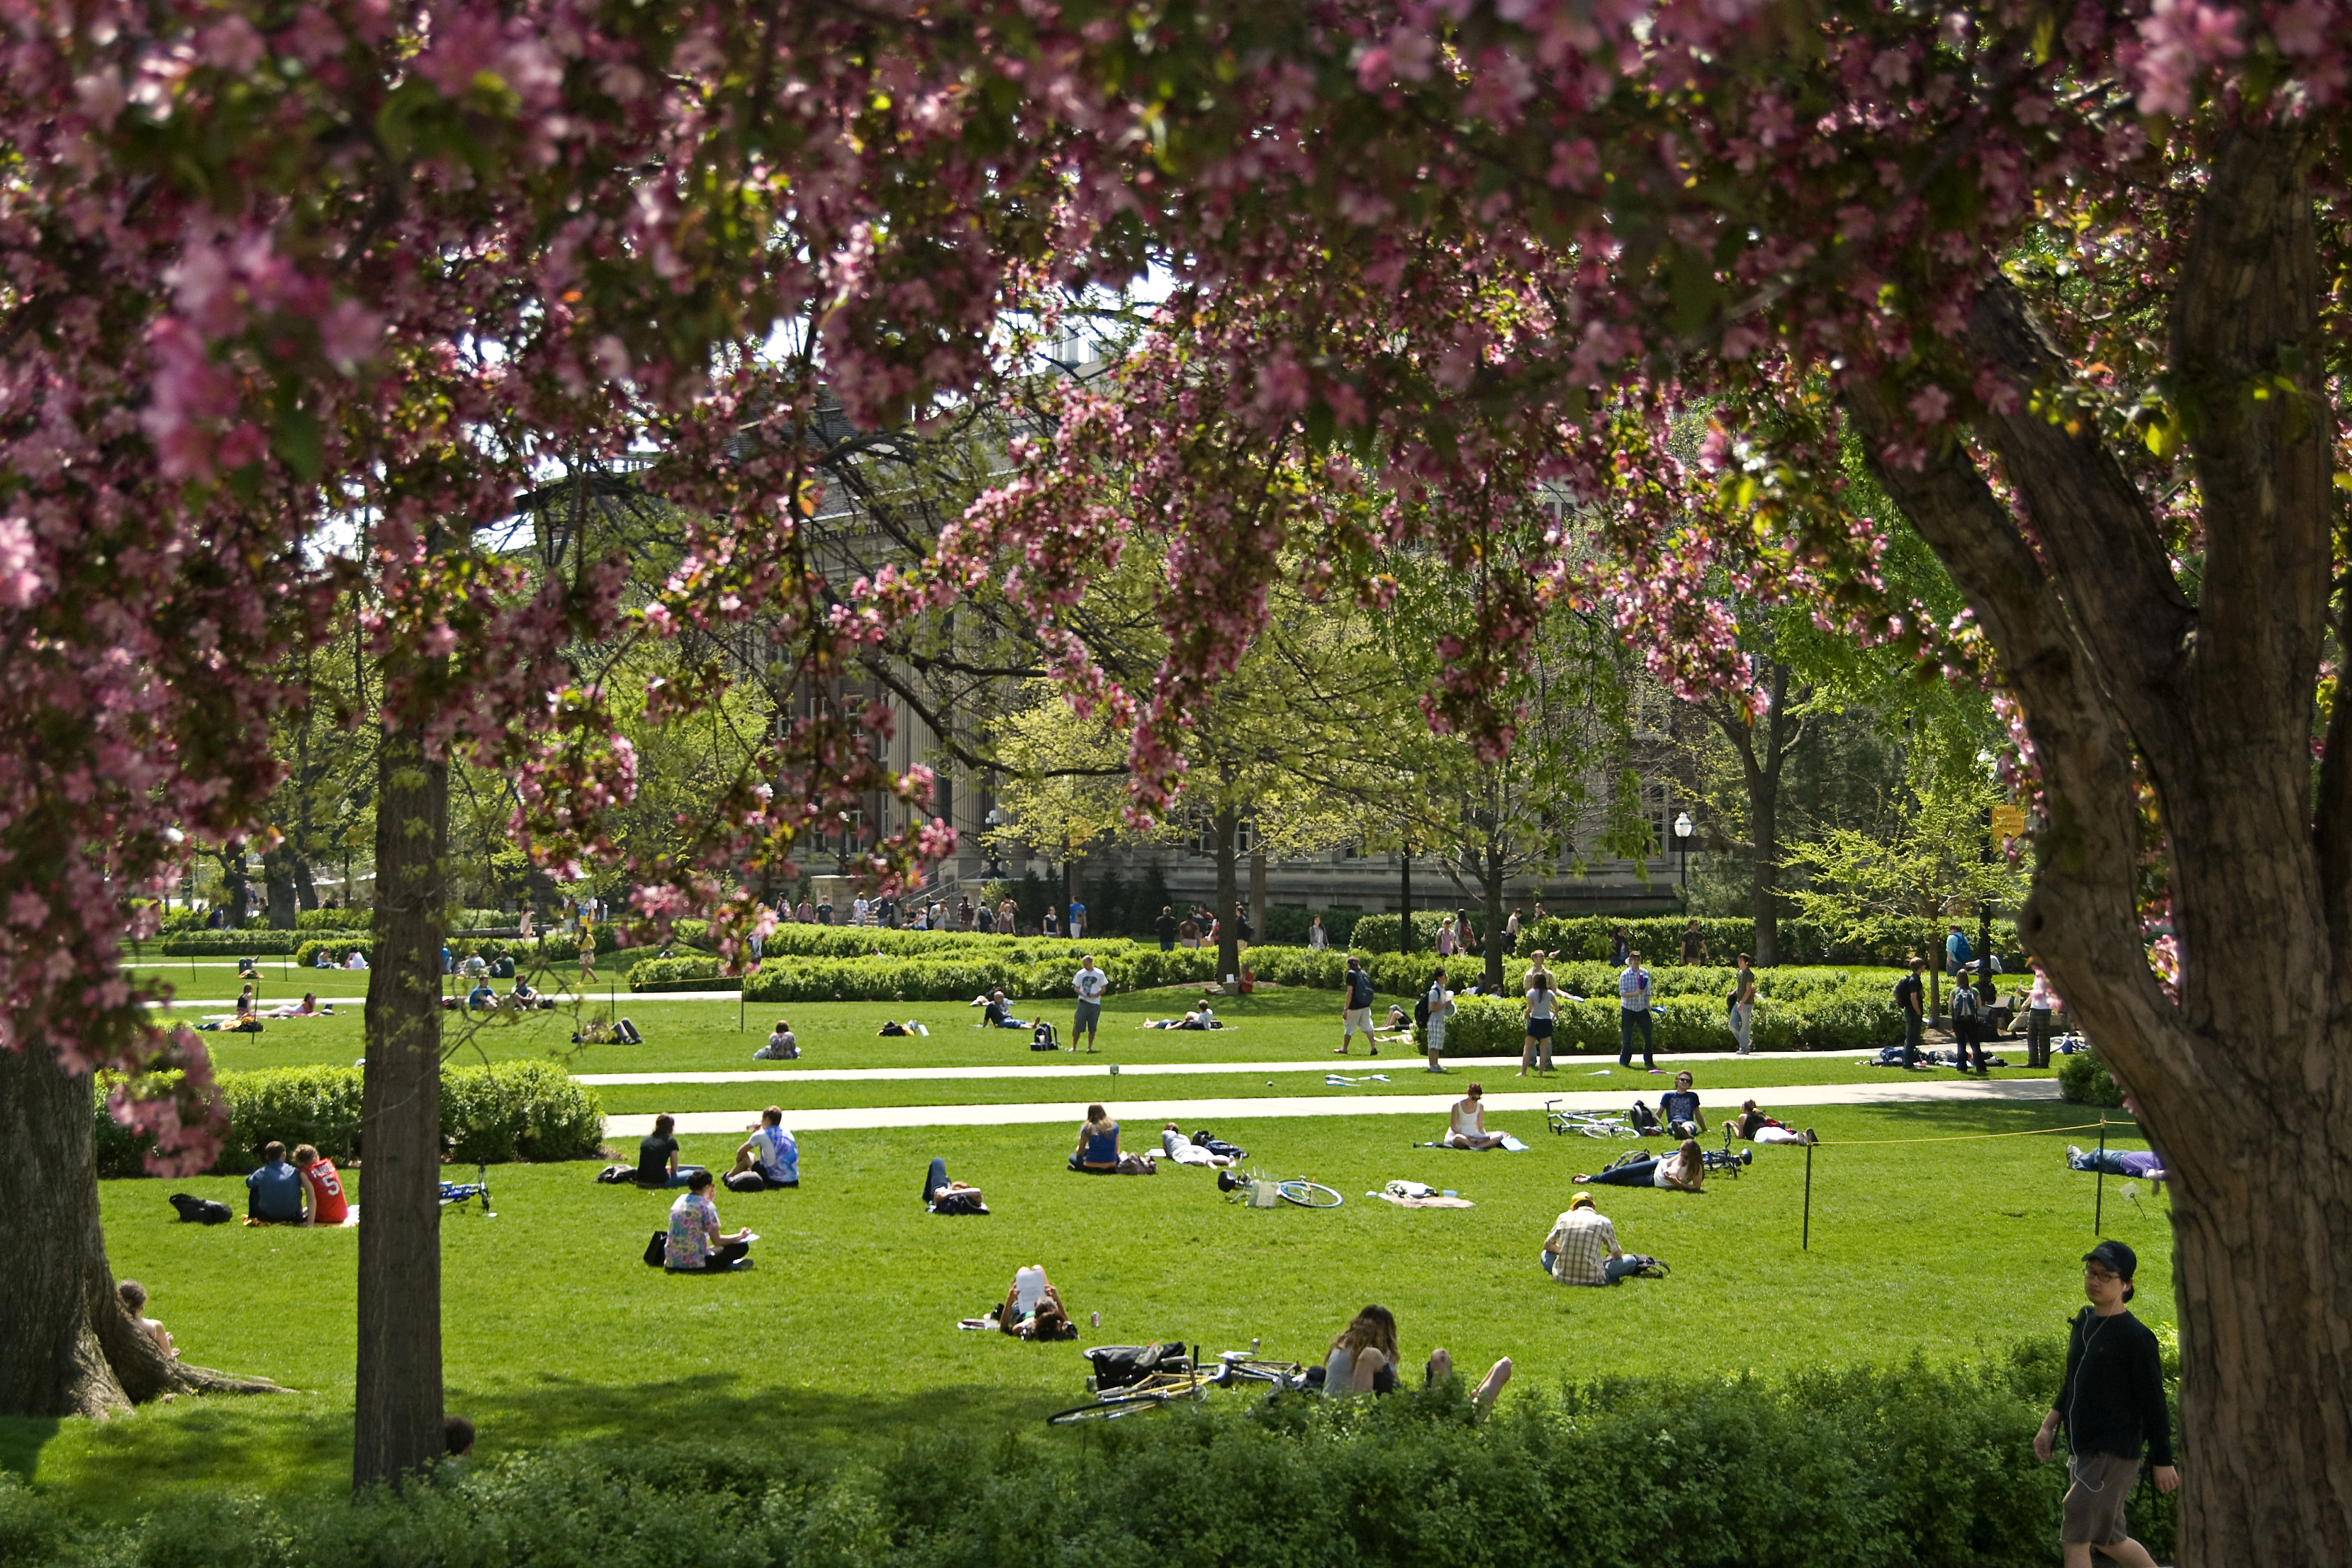 Students studying on grass through blossoming trees